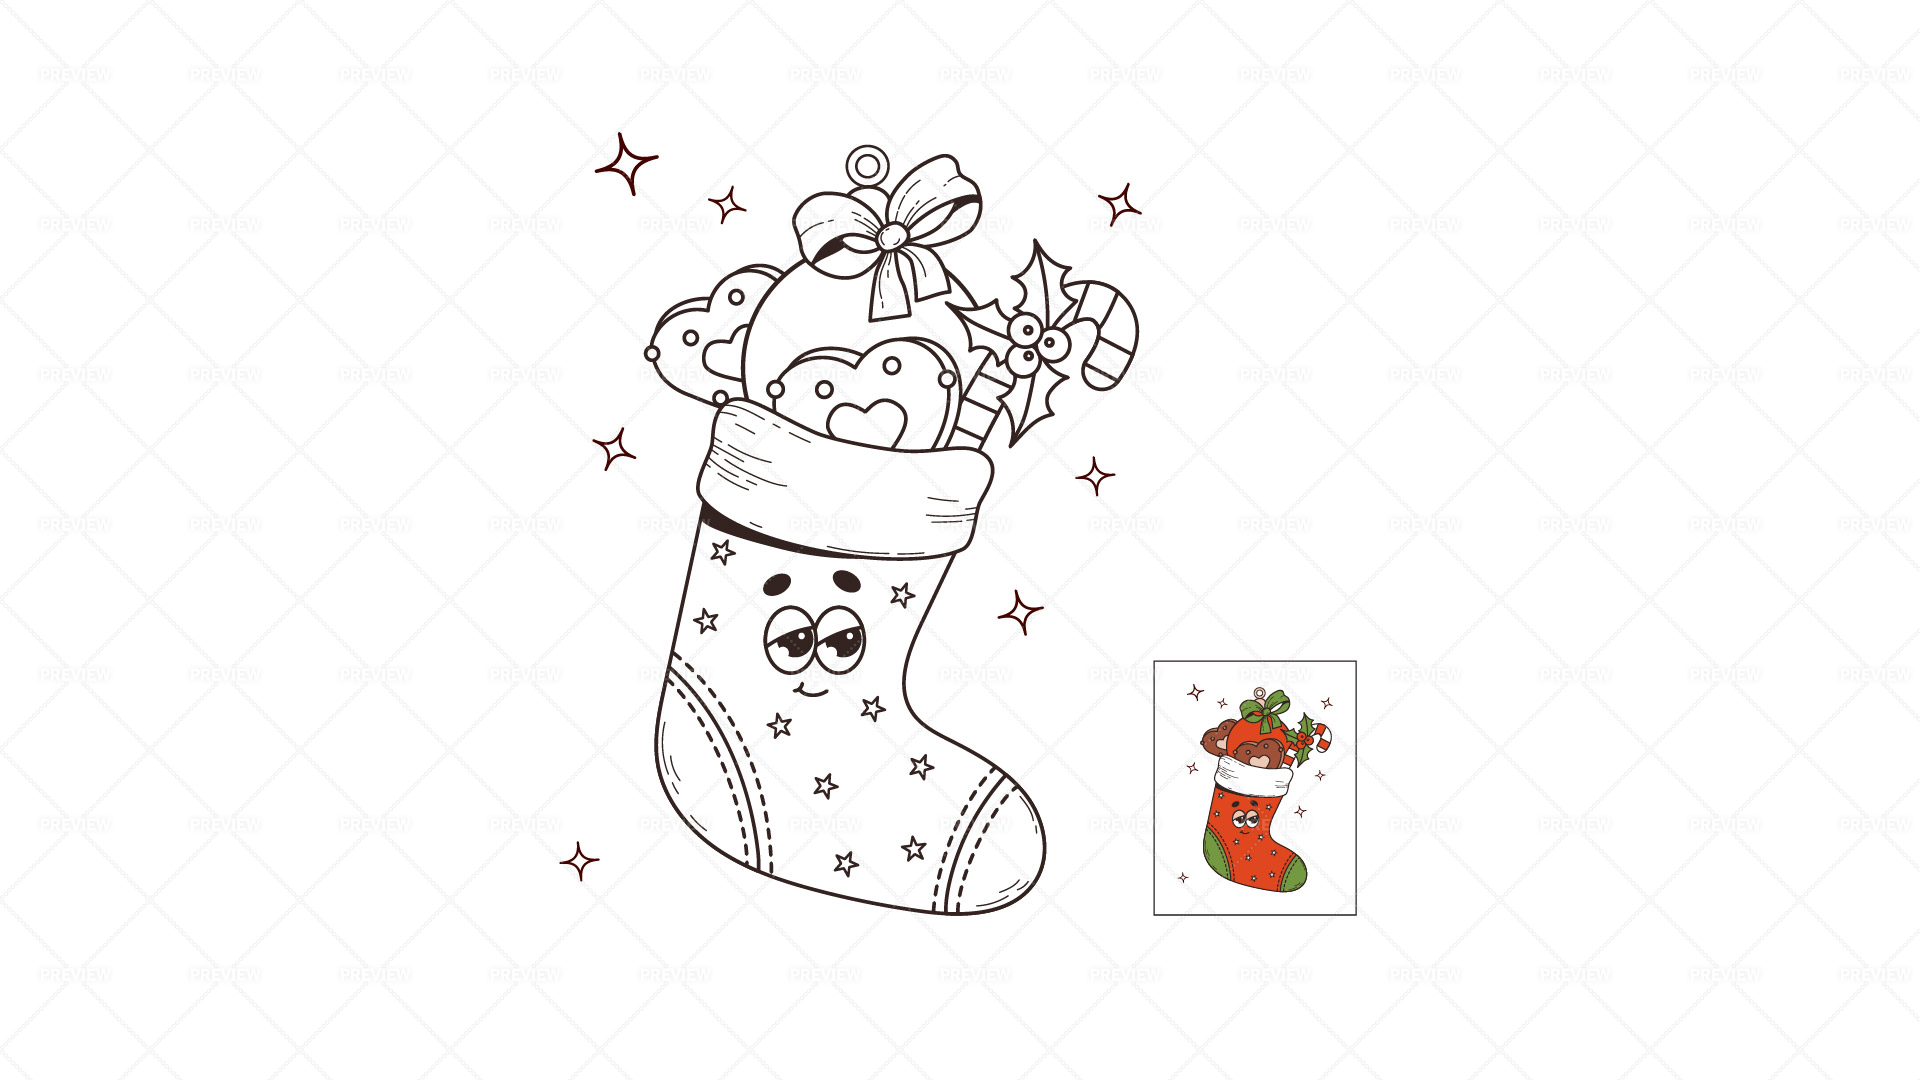 How to Draw a Christmas Stocking | Christmas Art for Kids | Art for Kids -  YouTube